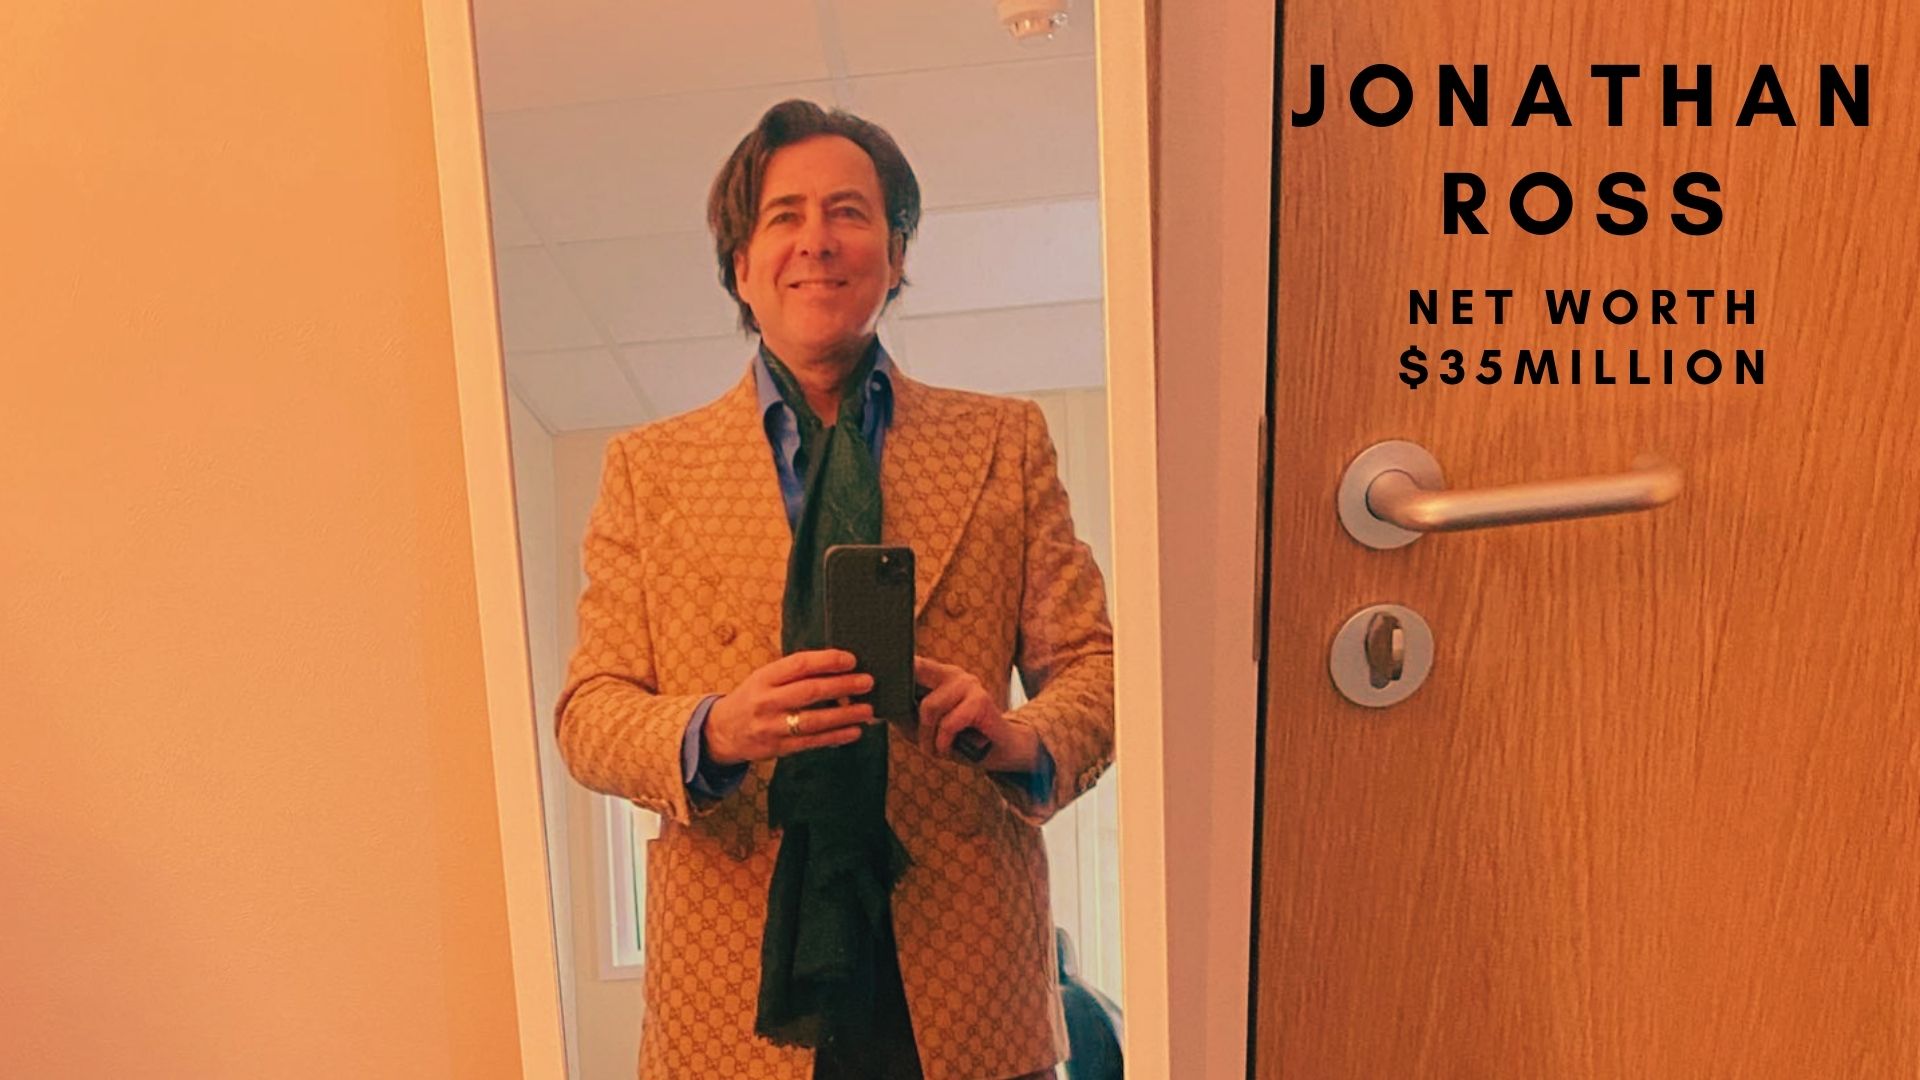 Jonathan Ross is a British television and radio presenter, comedian, and actor. He is well known for hosting his chat show, "The Jonathan Ross Show". (Credits: @mewossy Instagram)